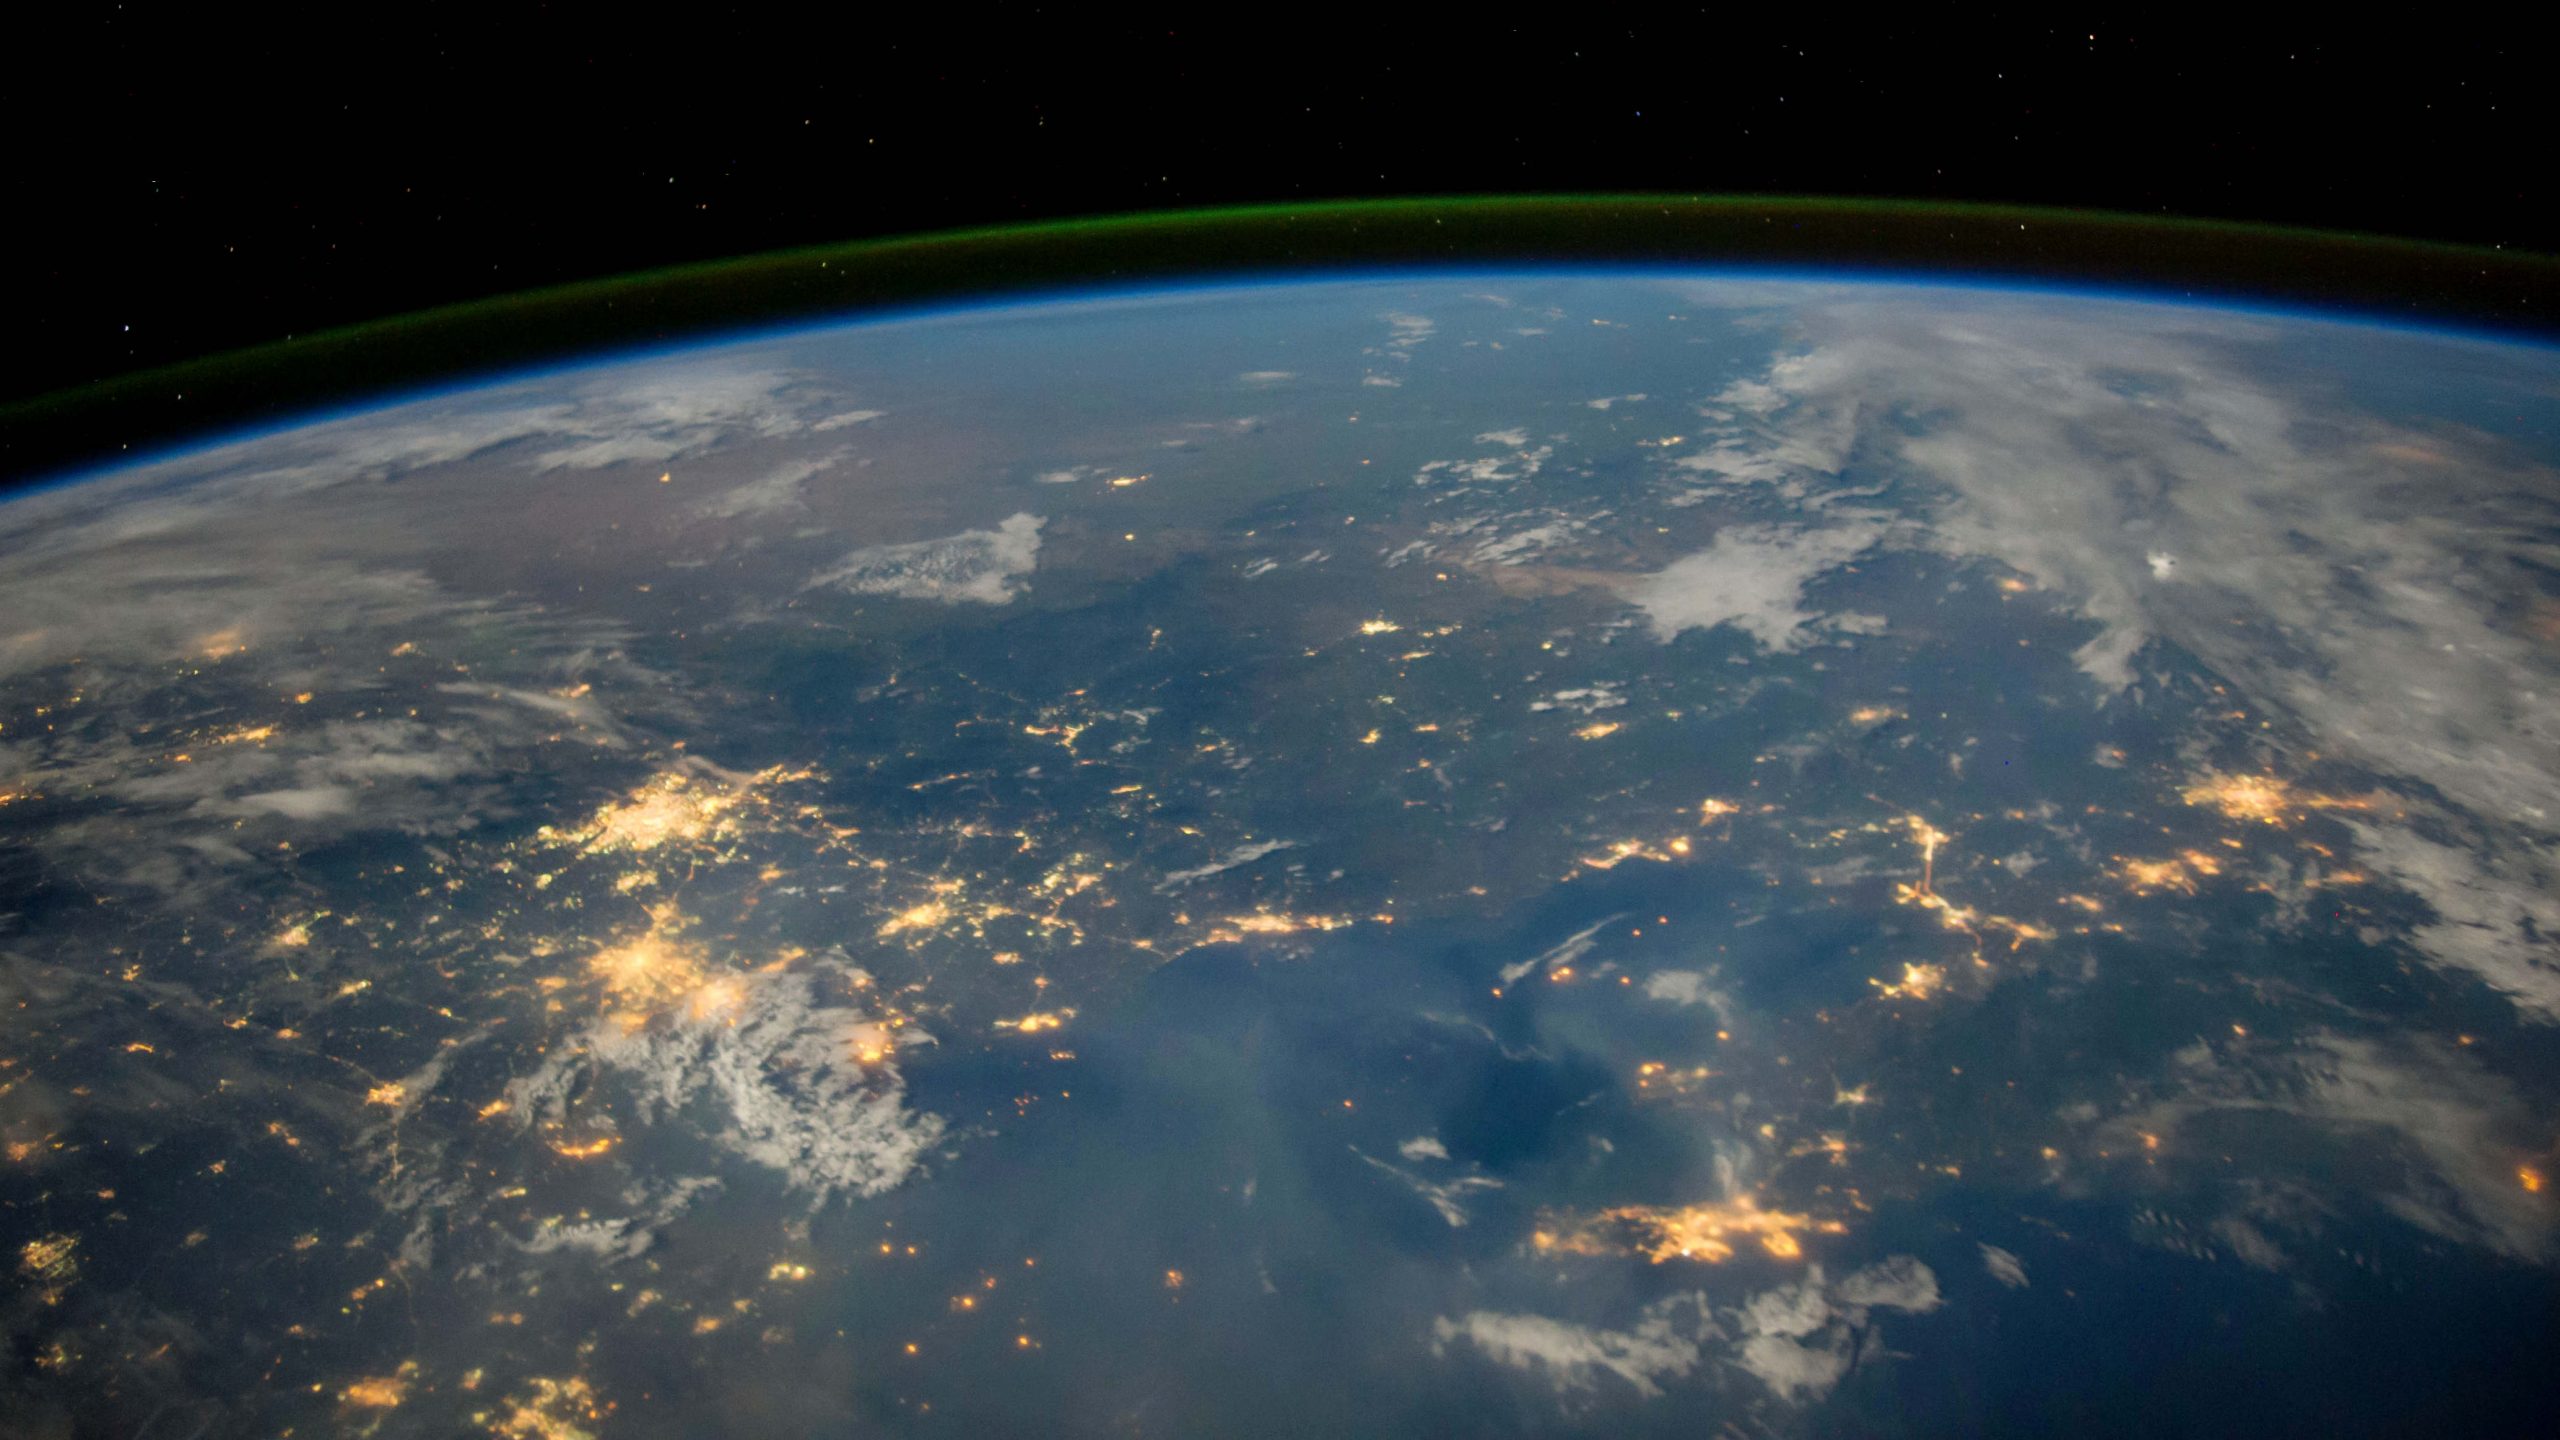 a view of the earth with cities illuminated